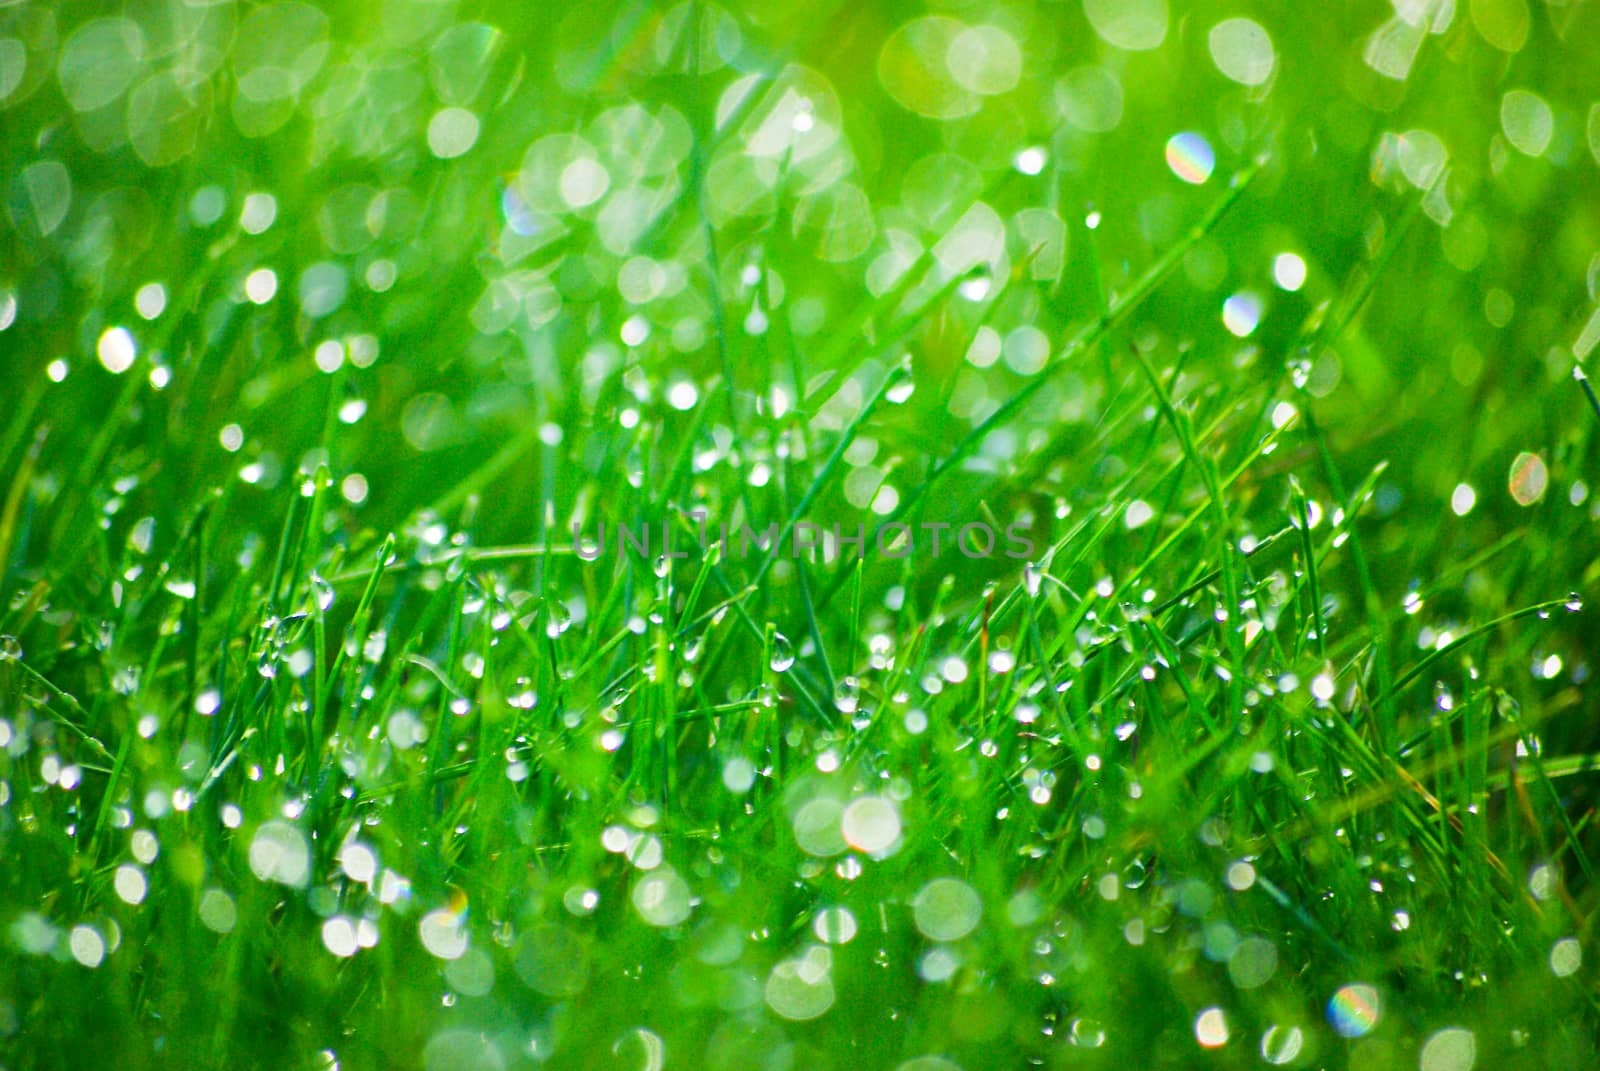 Green grass with dewdrops on the surface.Texture or background by Mastak80